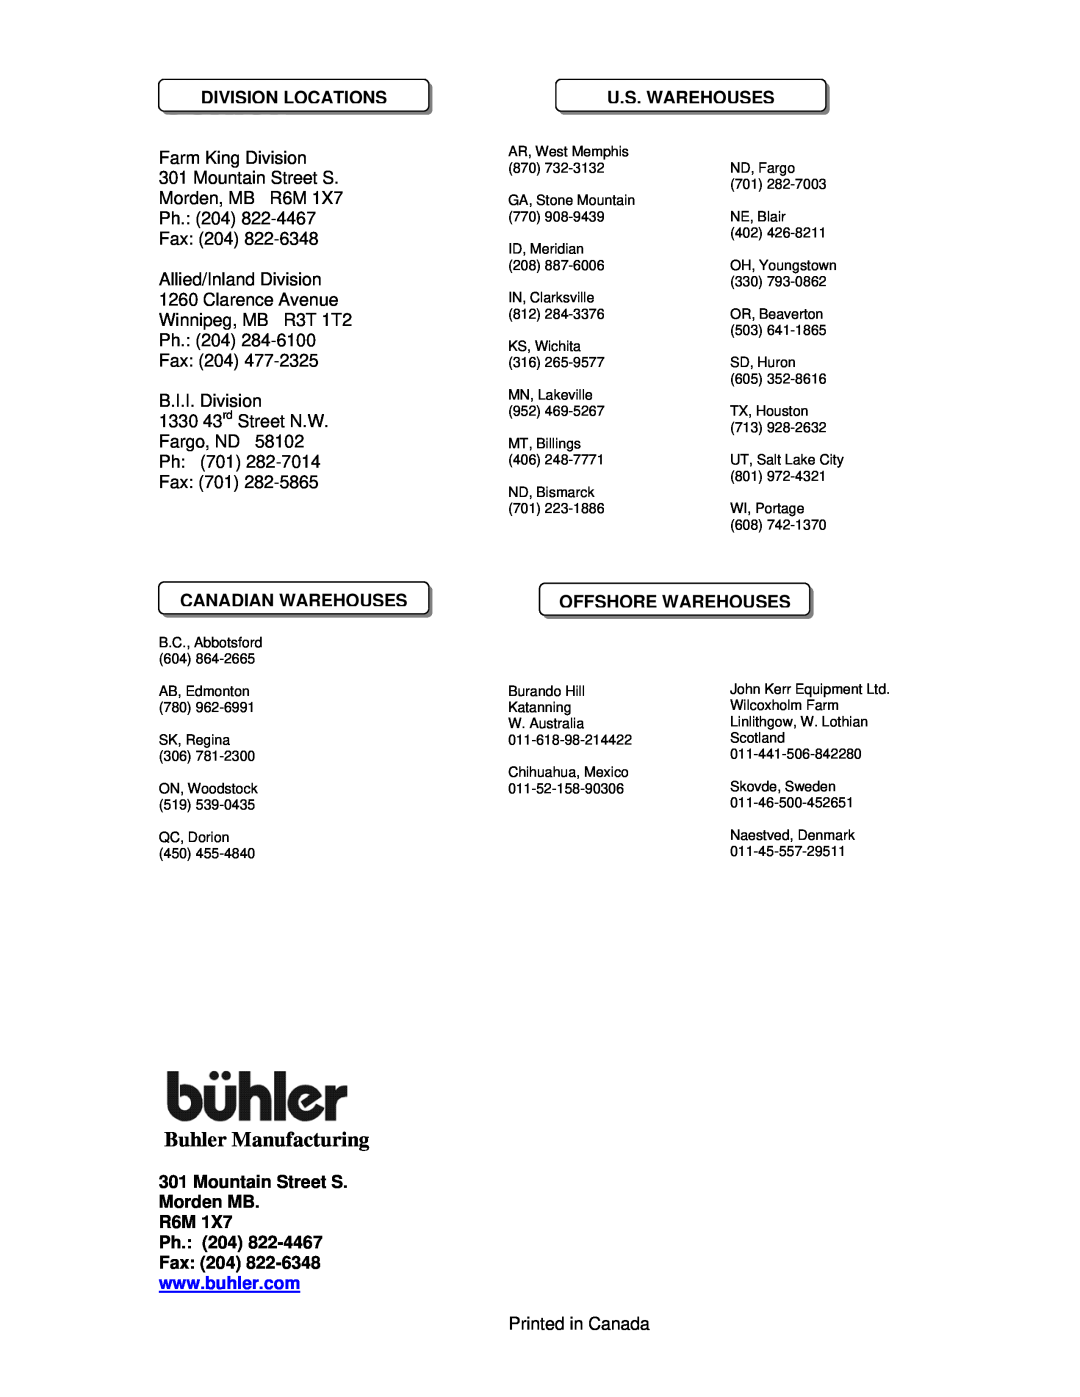 Buhler FK353 manual Buhler Manufacturing, Division Locations, Farm King Division 301 Mountain Street S, Ph 701 Fax 